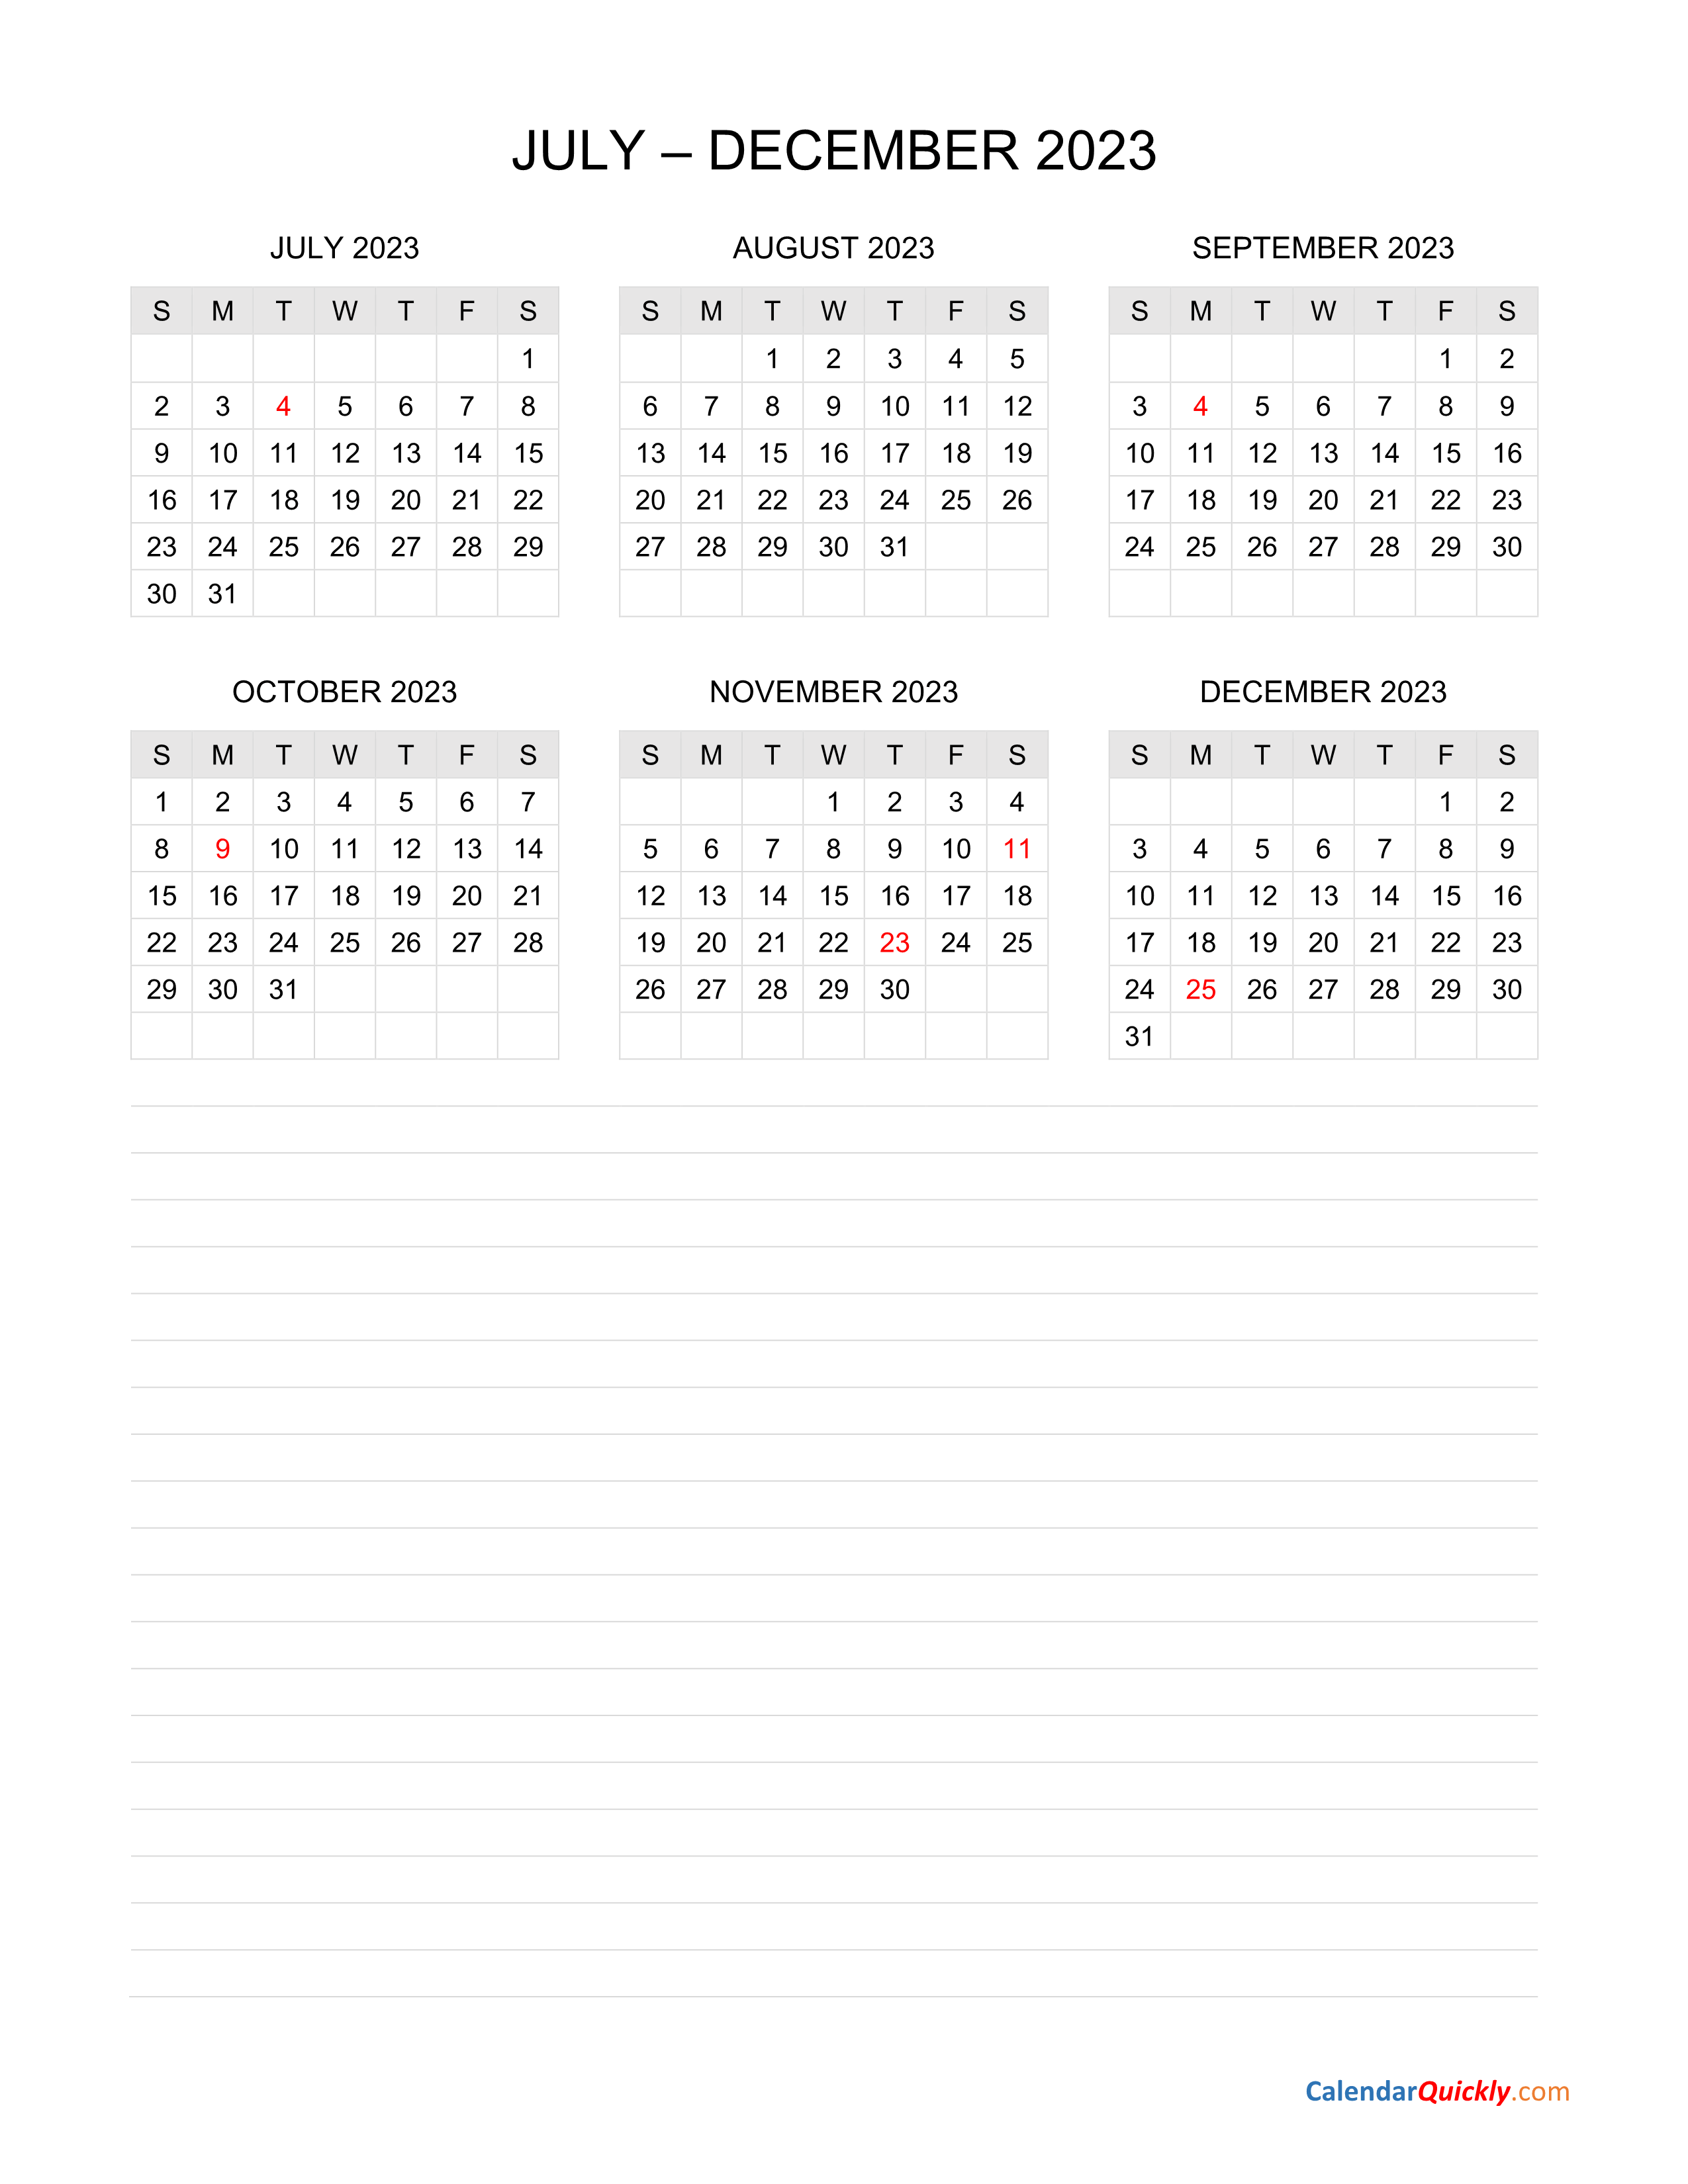 july-to-december-2023-calendar-with-notes-calendar-quickly